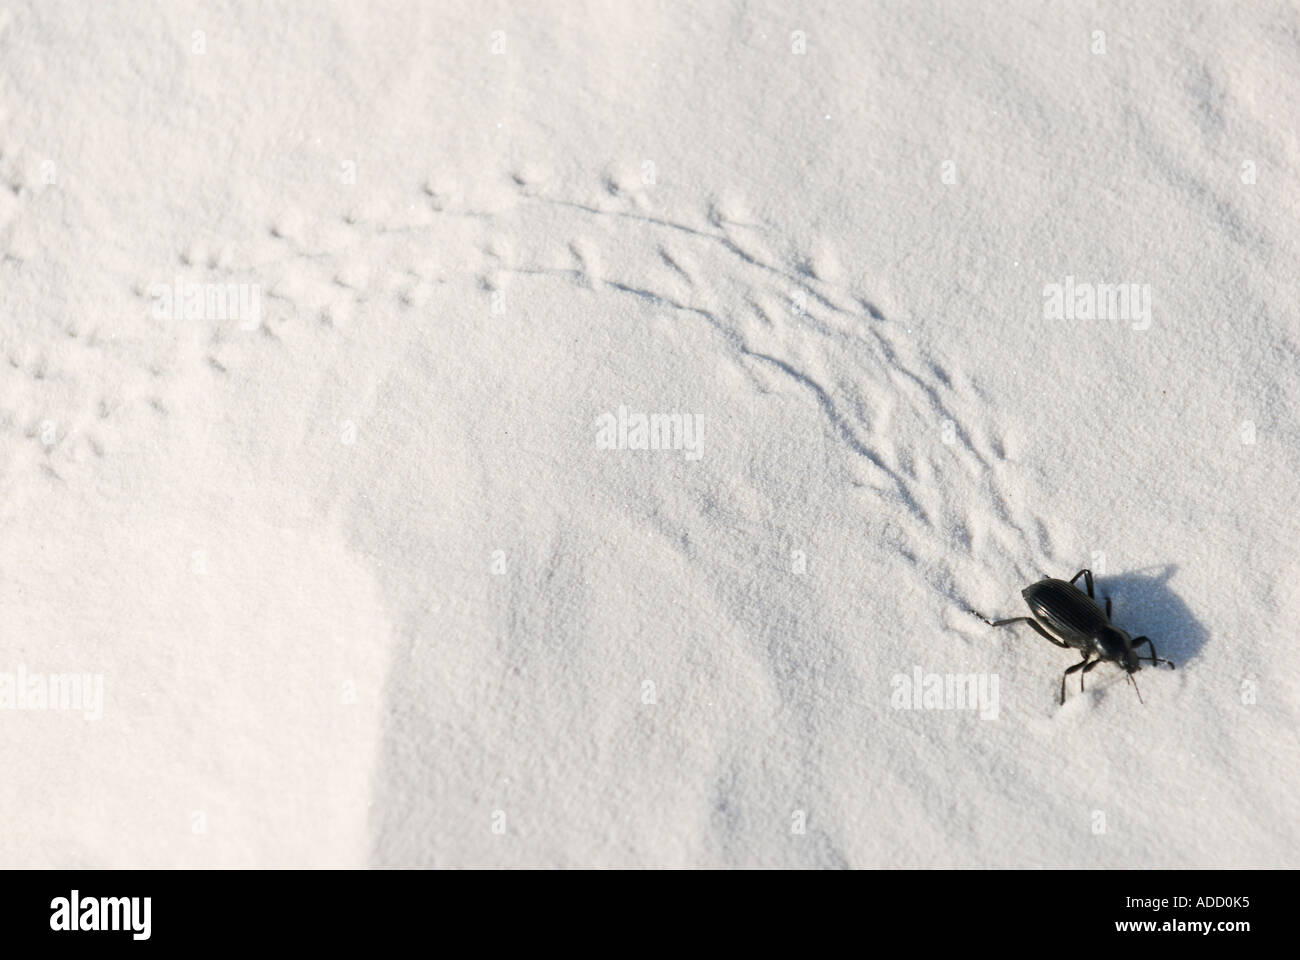 Darkling Beetle and tracks at White Sands National Monument Stock Photo